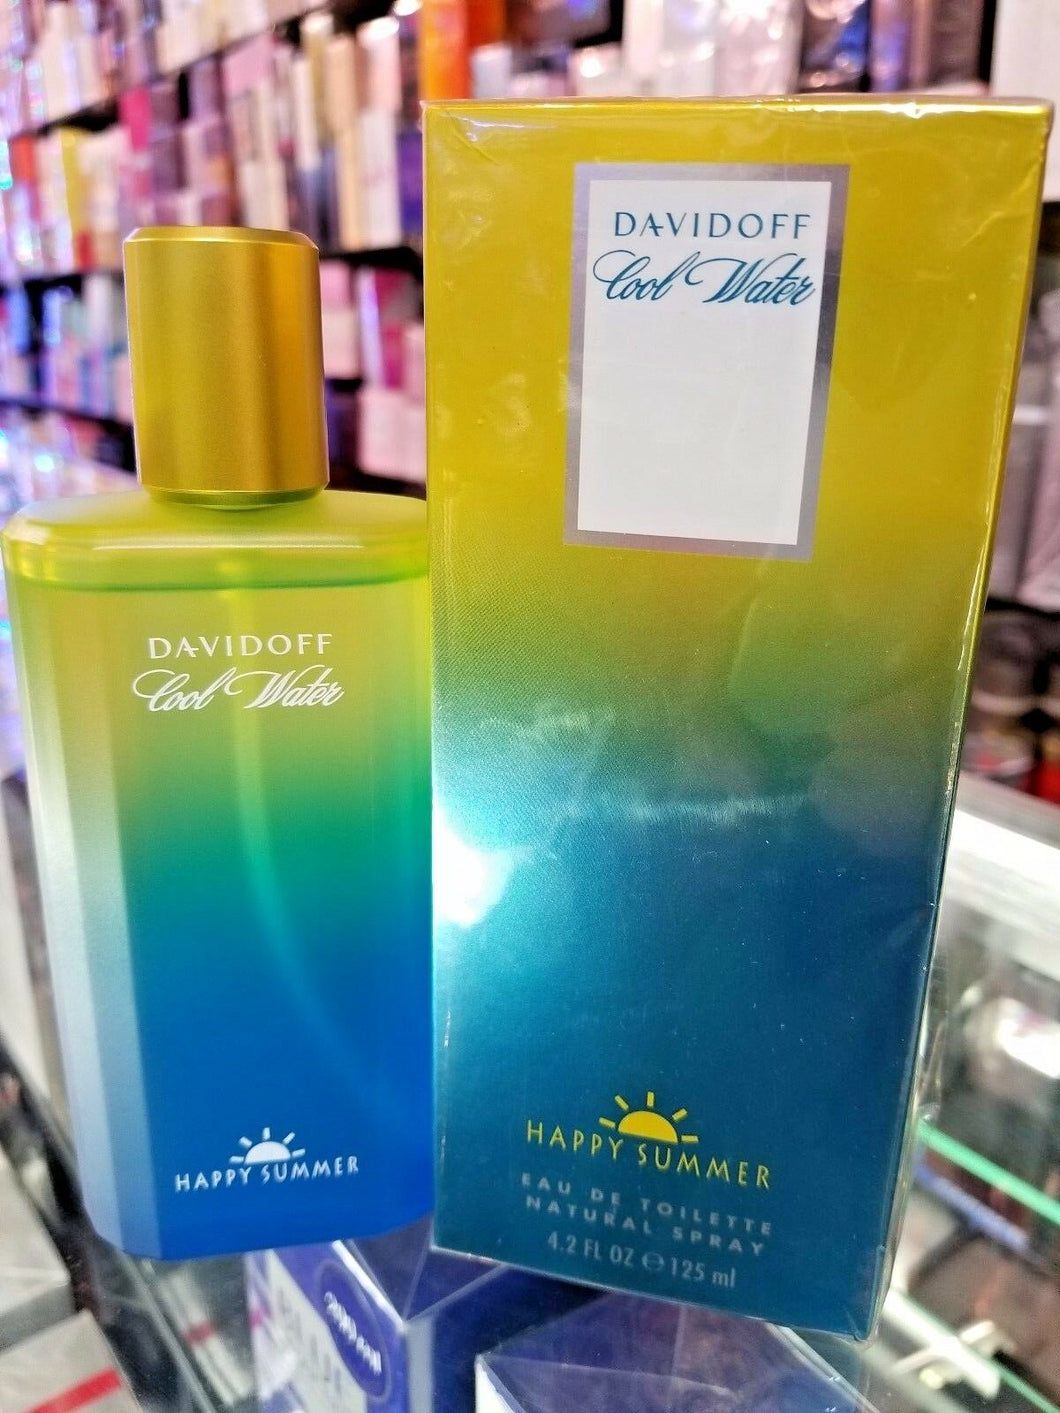 Davidoff Cool Water HAPPY SUMMER 4.2 oz / 125 ml EDT Toilette for Men SEALED BOX - Perfume Gallery